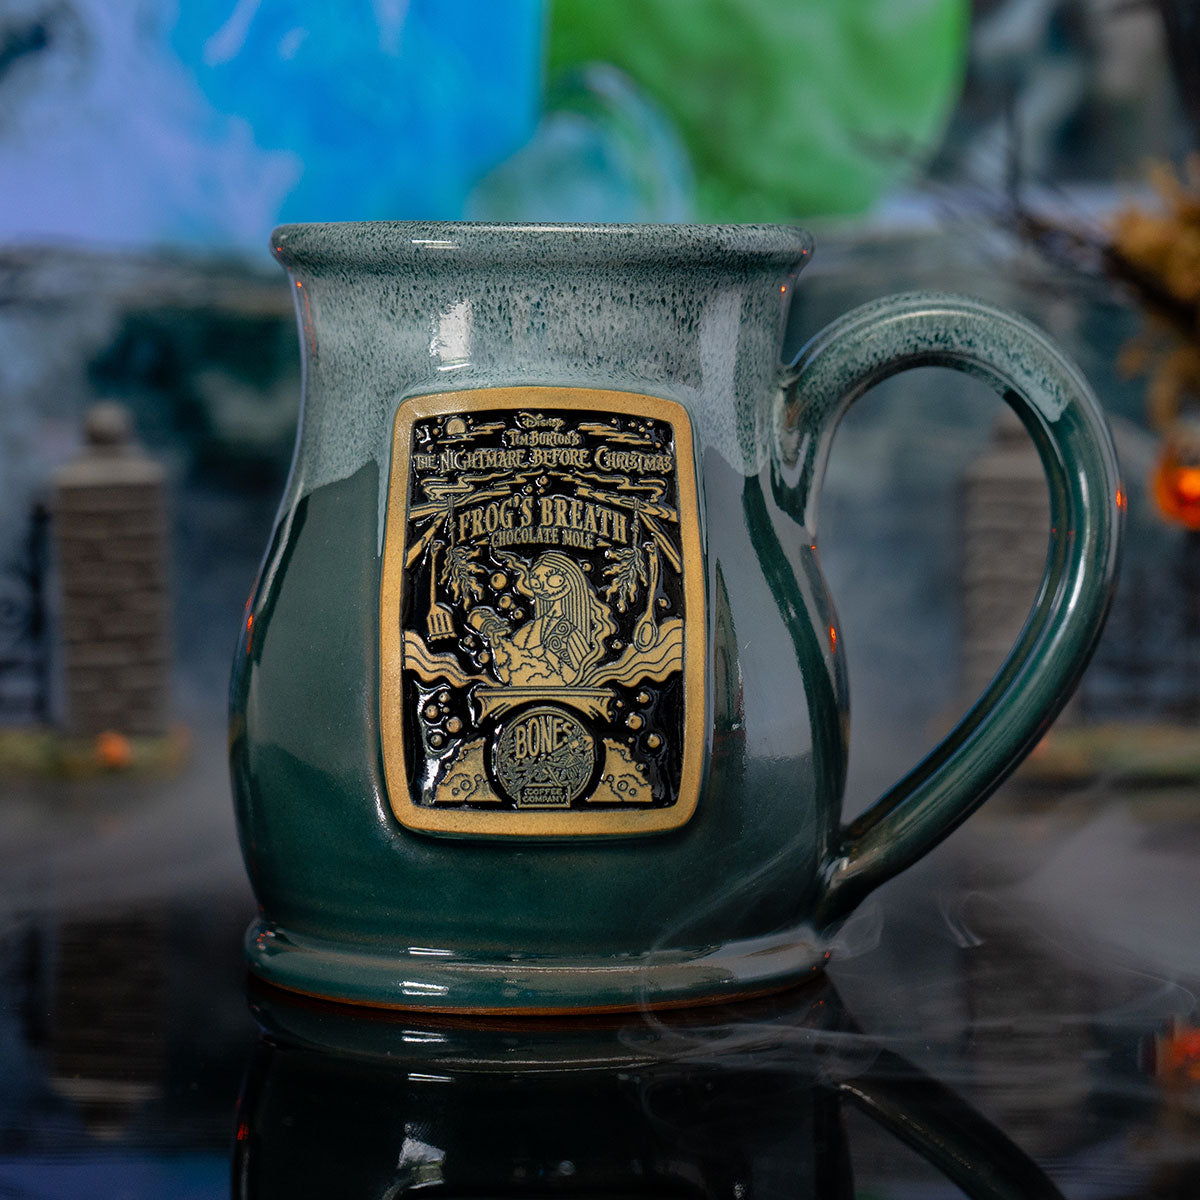 The front of the Bones Coffee Company Frog's Breath hand thrown mug with Sally on the golden medallion. It is inspired by Disney Tim Burton’s The Nightmare Before Christmas. The mug is green colored with a white glaze on top of it. It is inside a foggy toy graveyard.